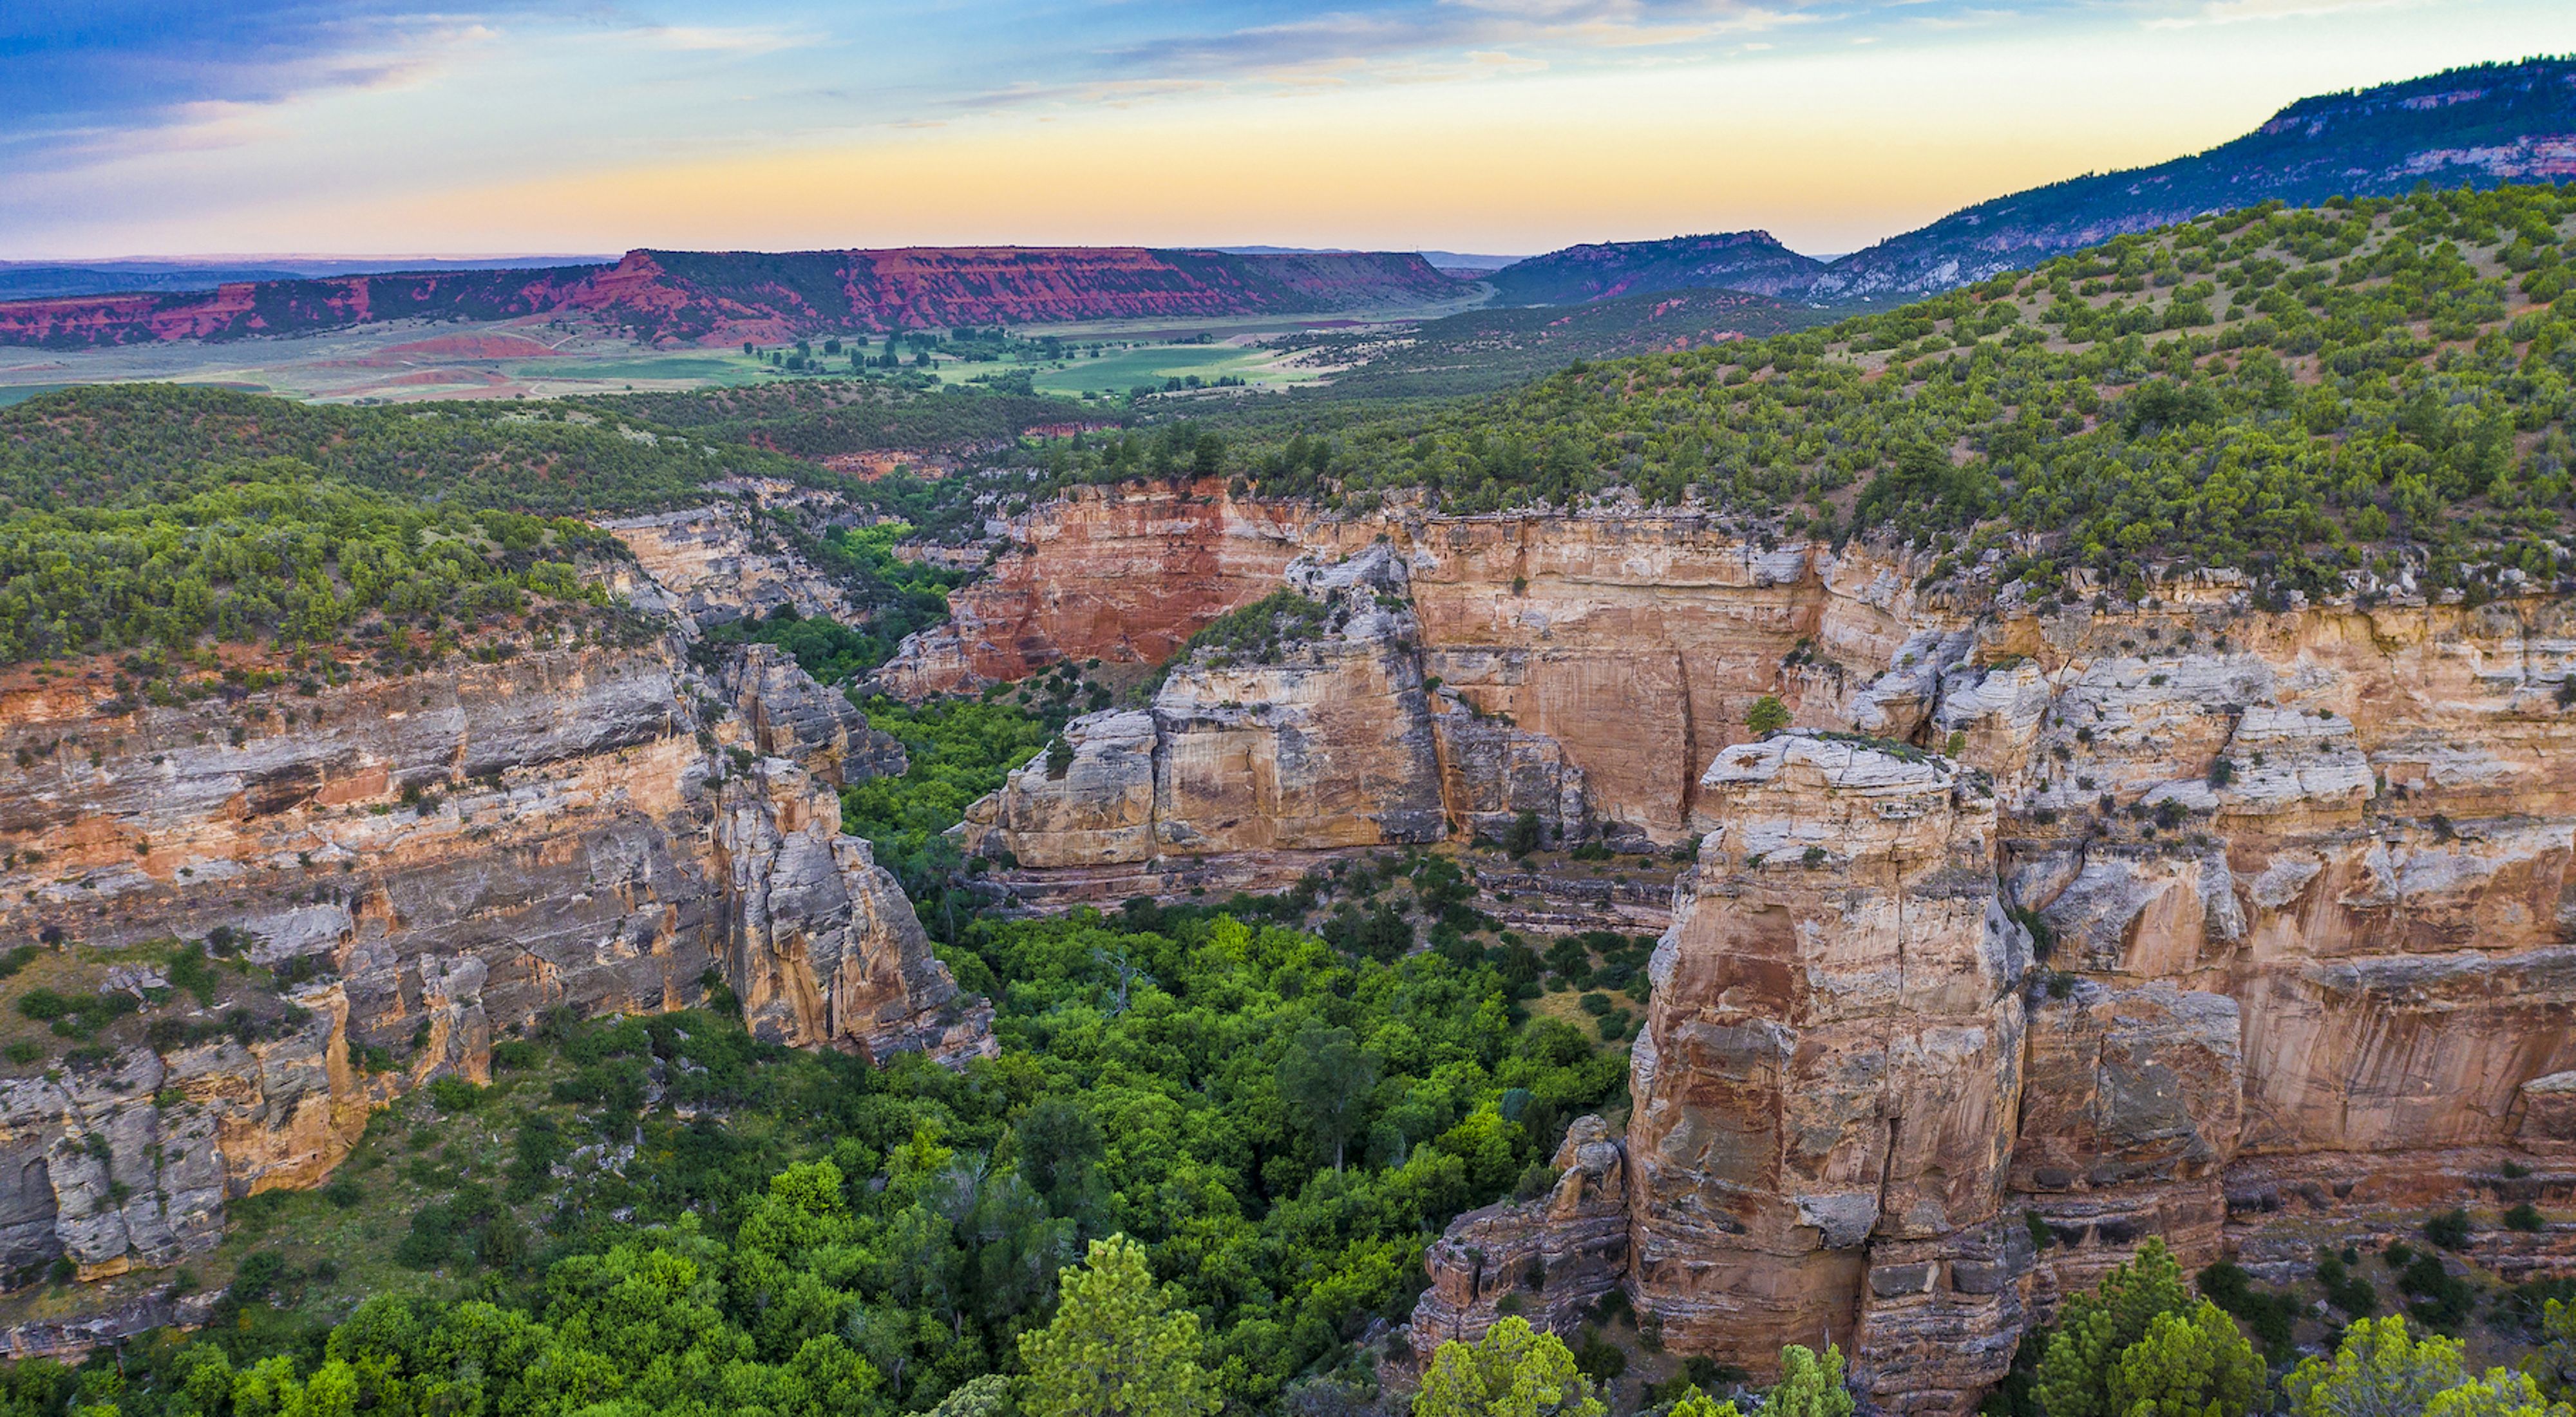 A sunset sky over rocky canyons covered in lush green bushes. 